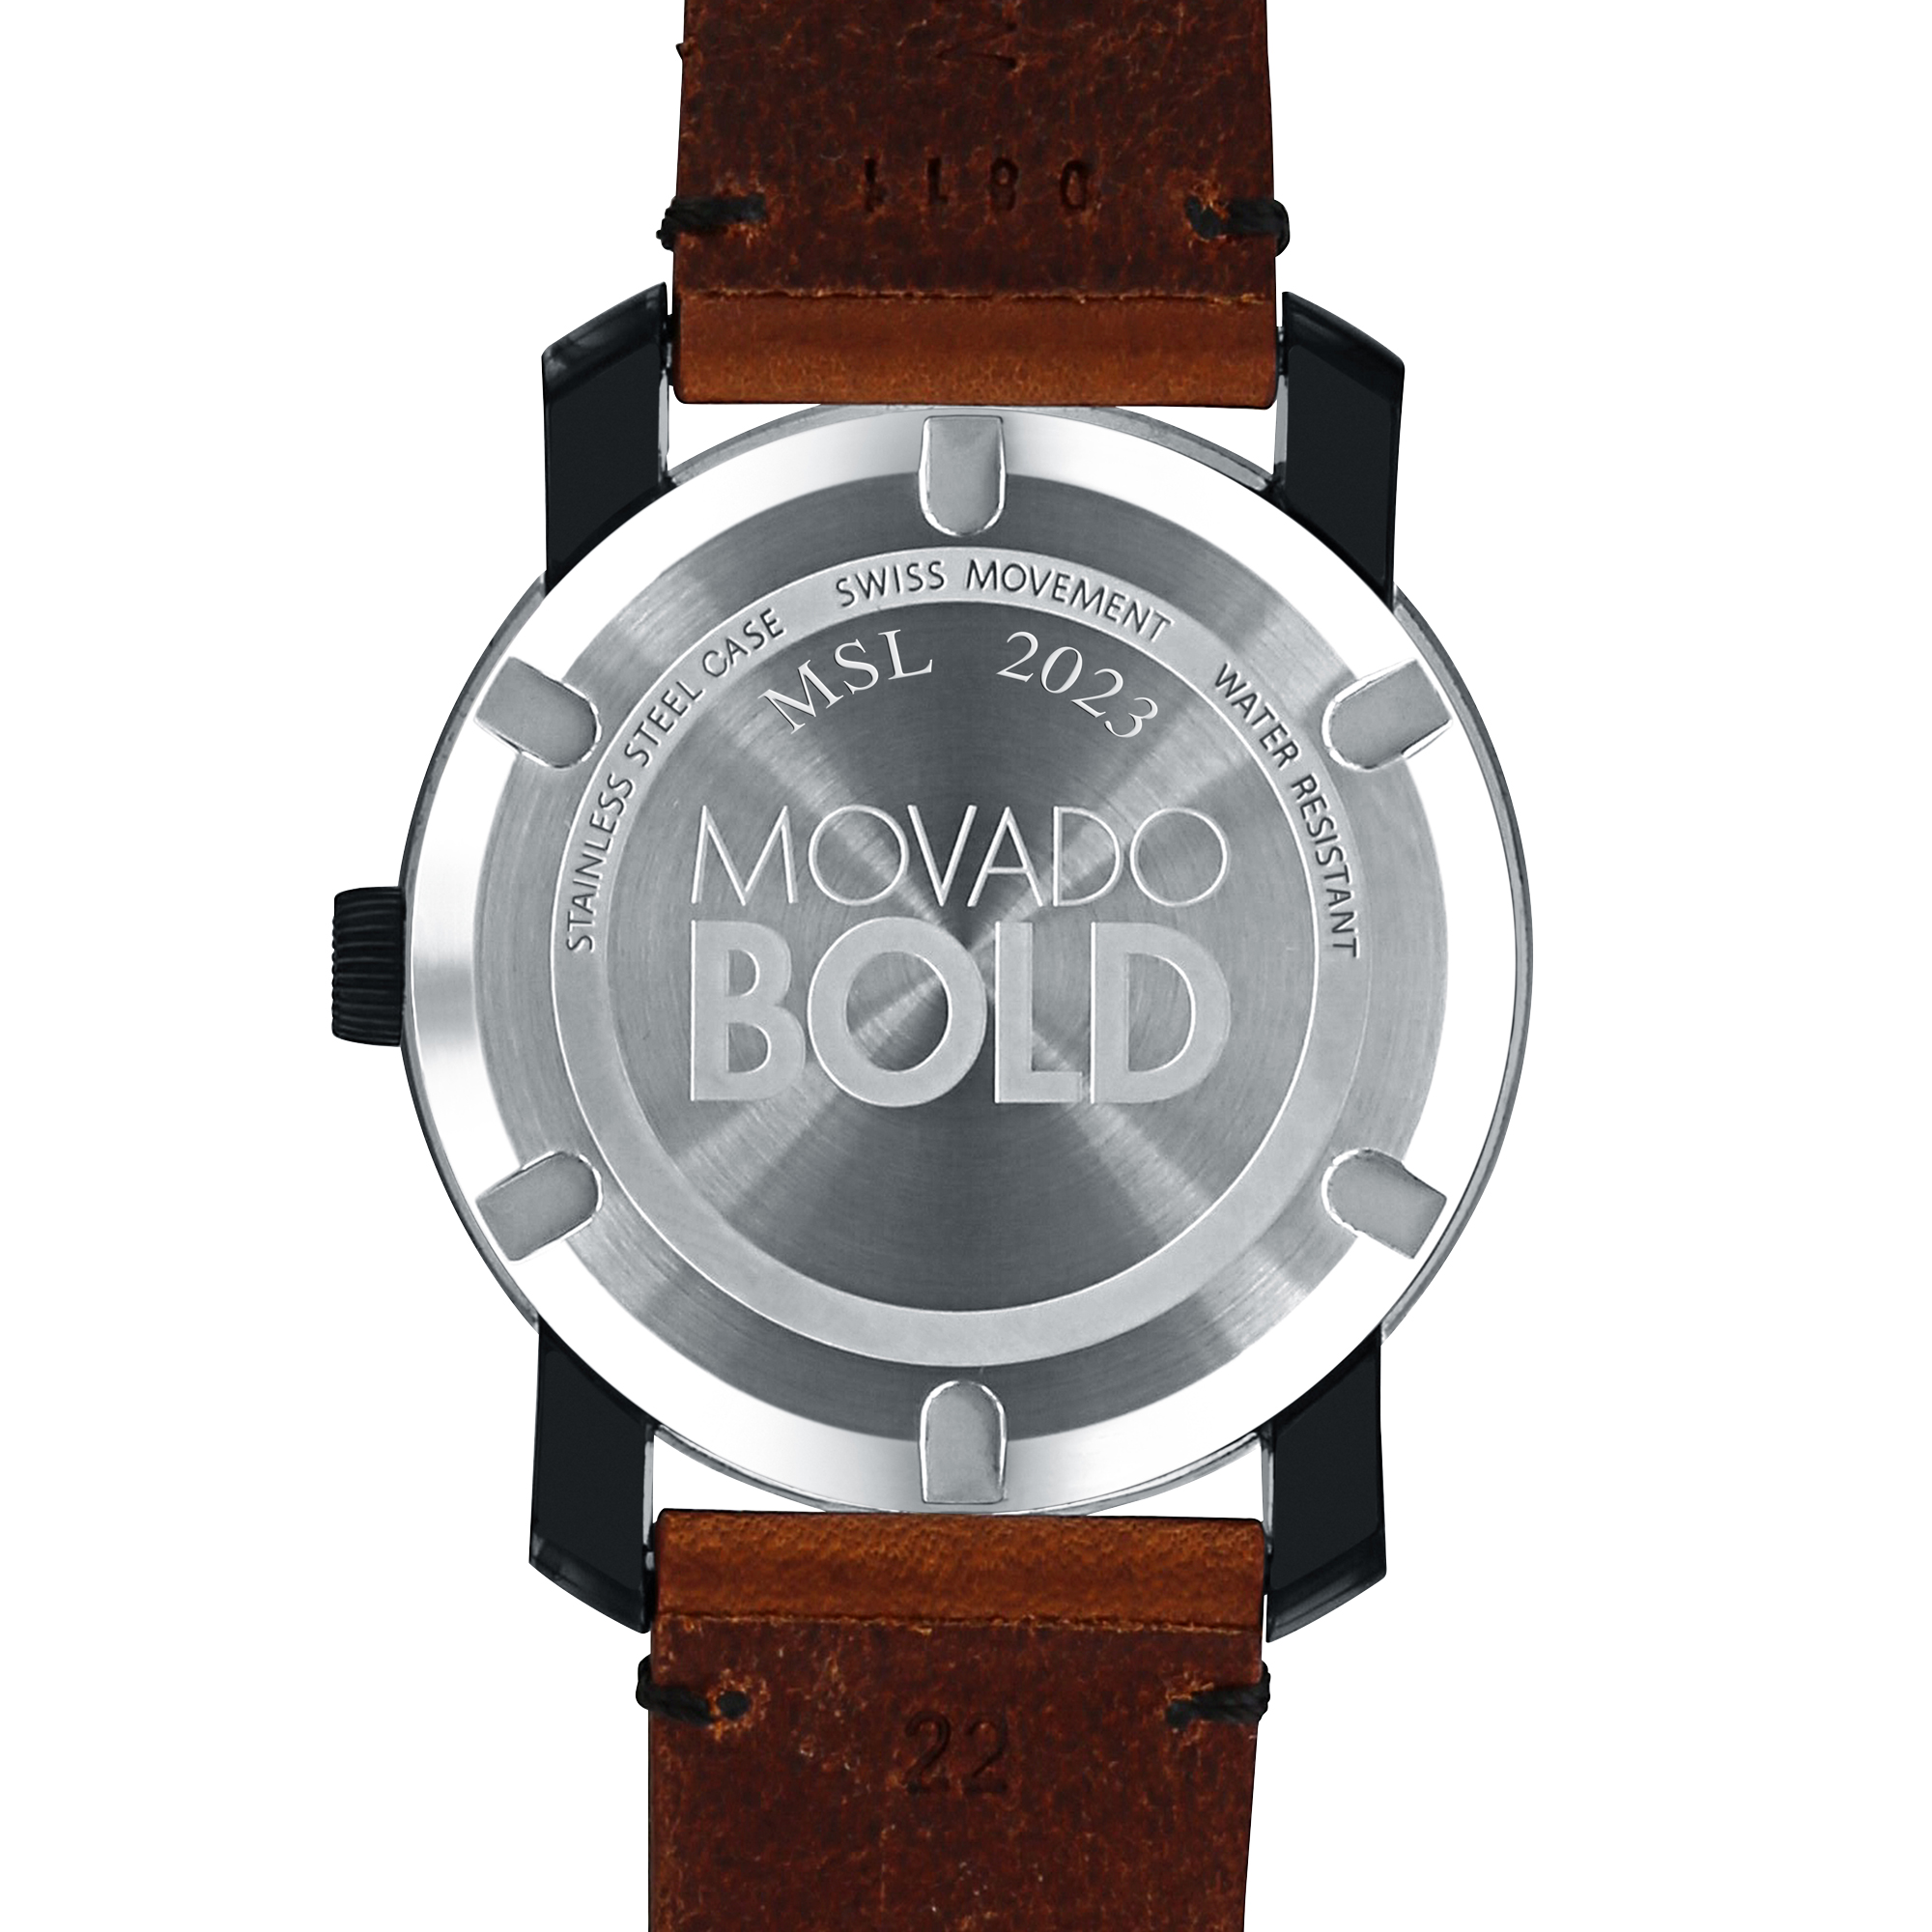 University of St. Thomas Men's Movado BOLD with Brown Leather Strap - Image 3